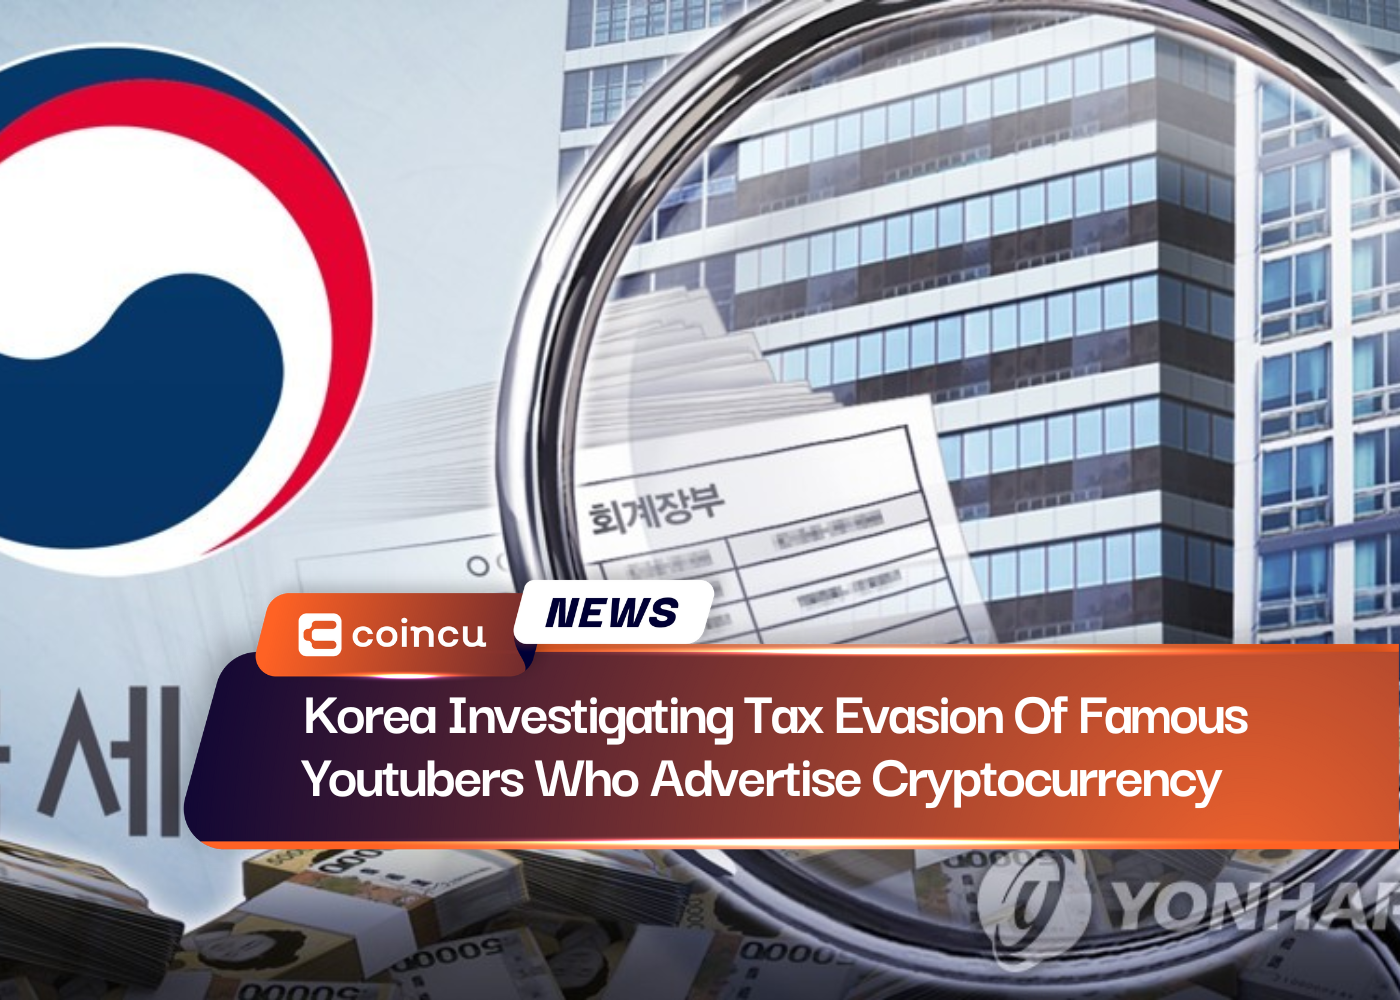 Korea Begins Investigating Tax Evasion Of Famous Youtubers Who Advertise Cryptocurrency